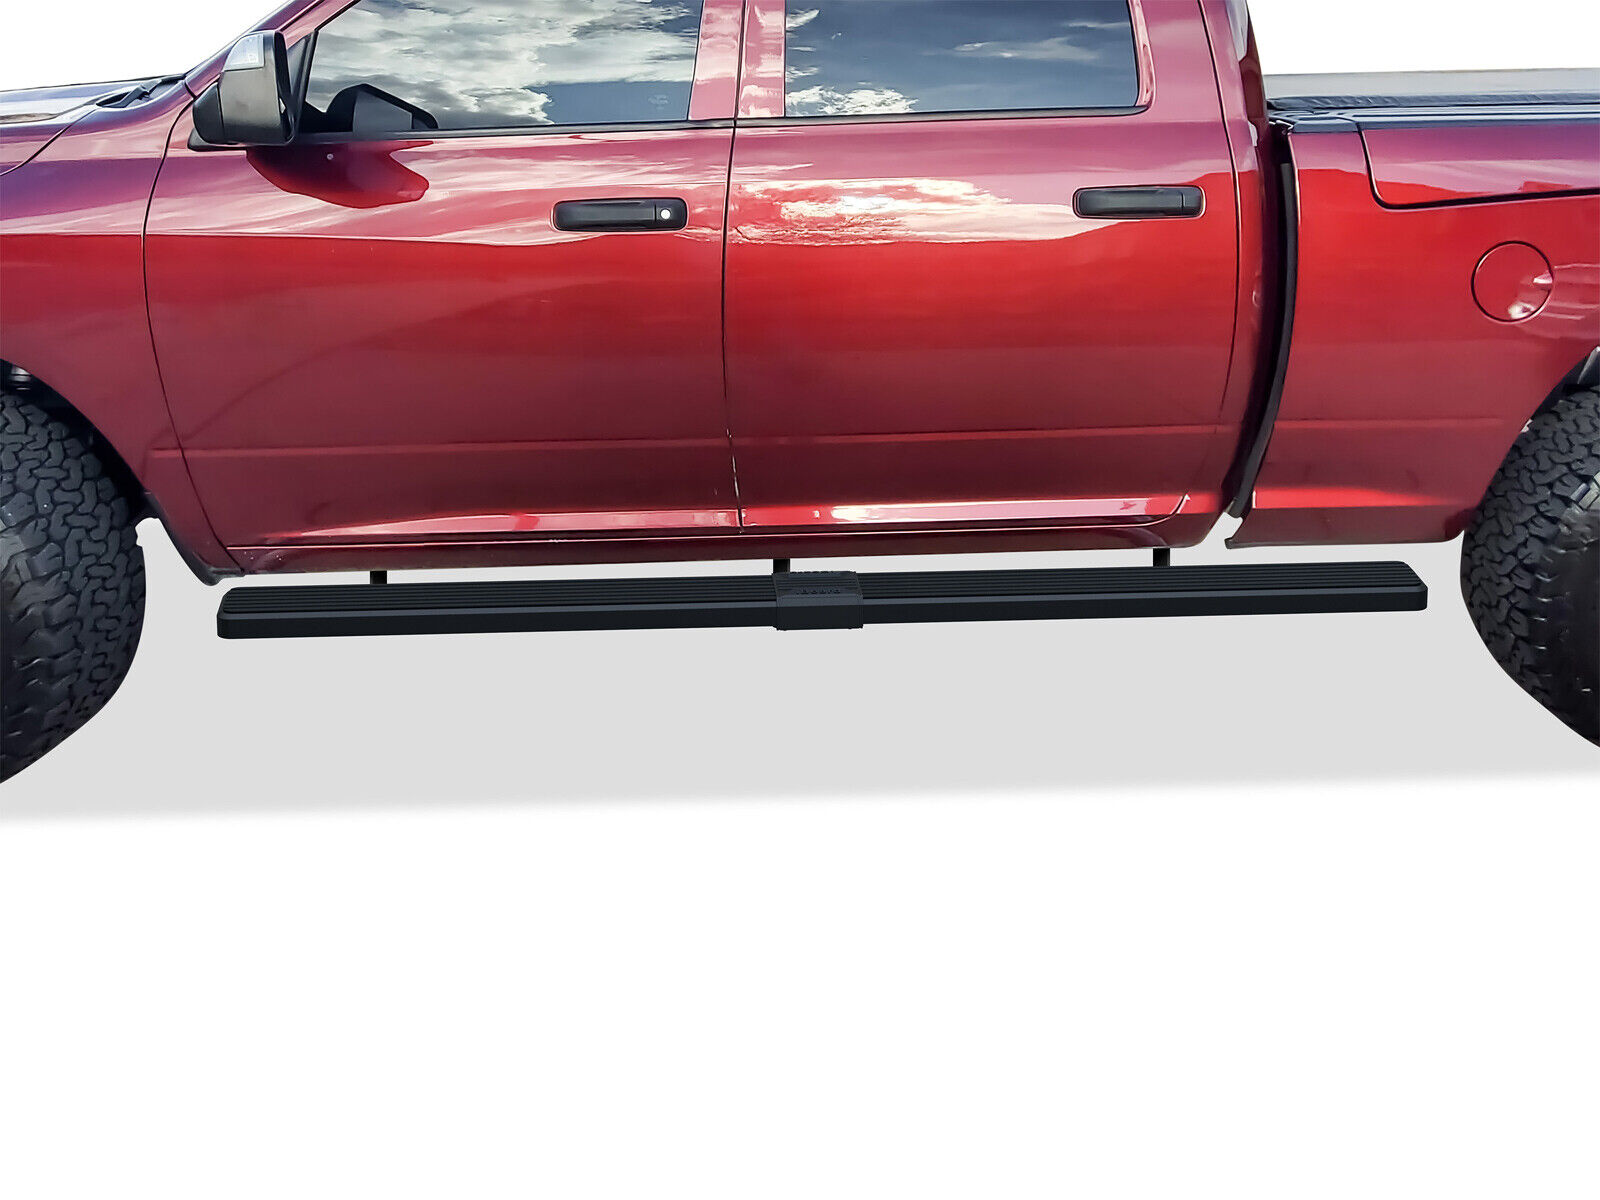 APS Wheel to Wheel Running Boards 6 inches Fit 09-18 Ram Crew Cab 6.5ft Bed